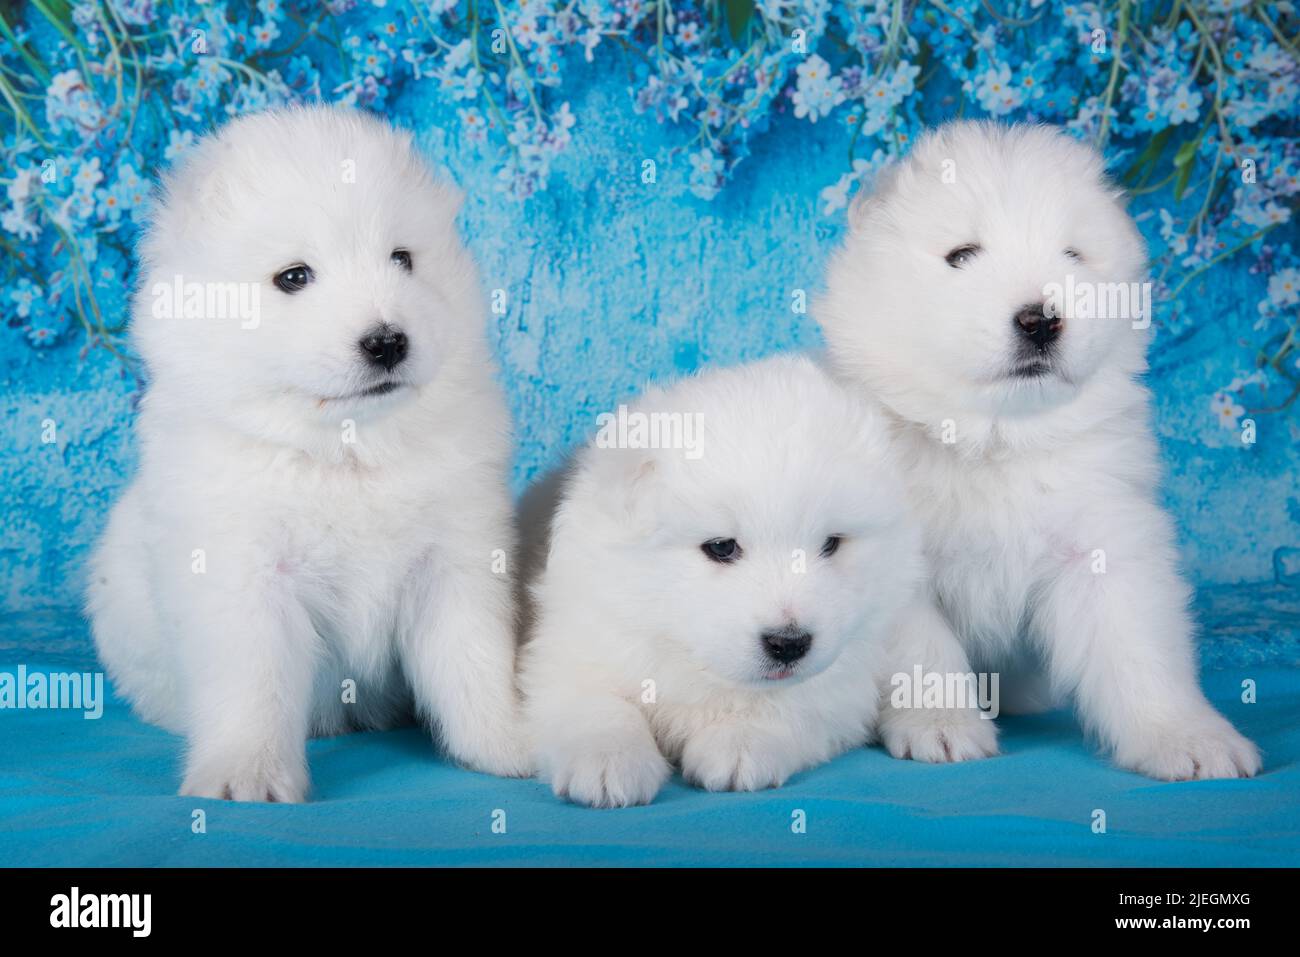 Three White fluffy small Samoyed puppies dogs are sitting on blue background with blue flowers Stock Photo